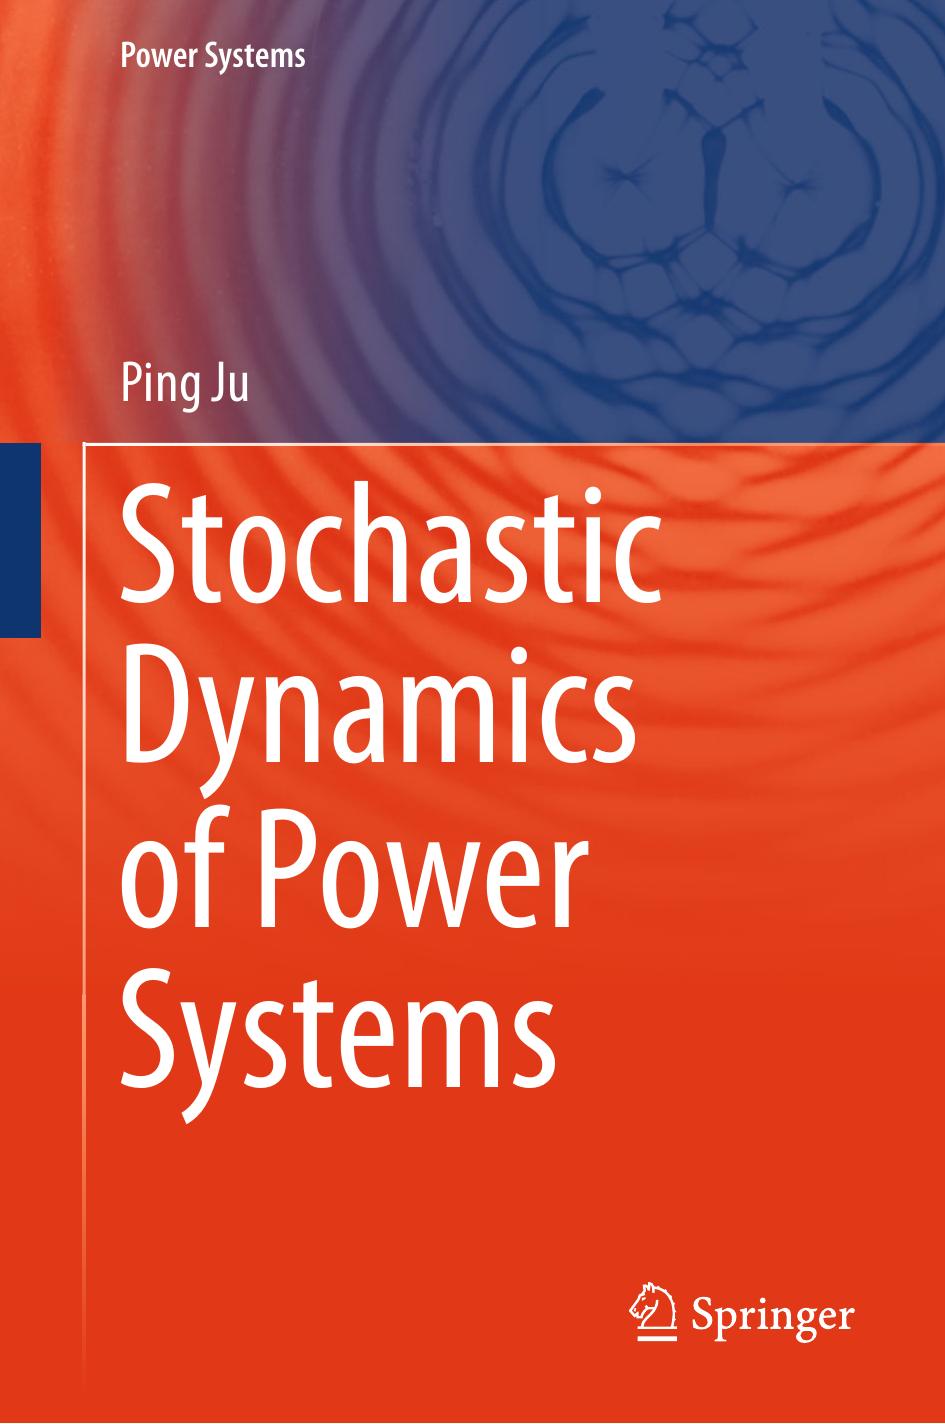 Stochastic Dynamics of Power Systems by Ping Ju